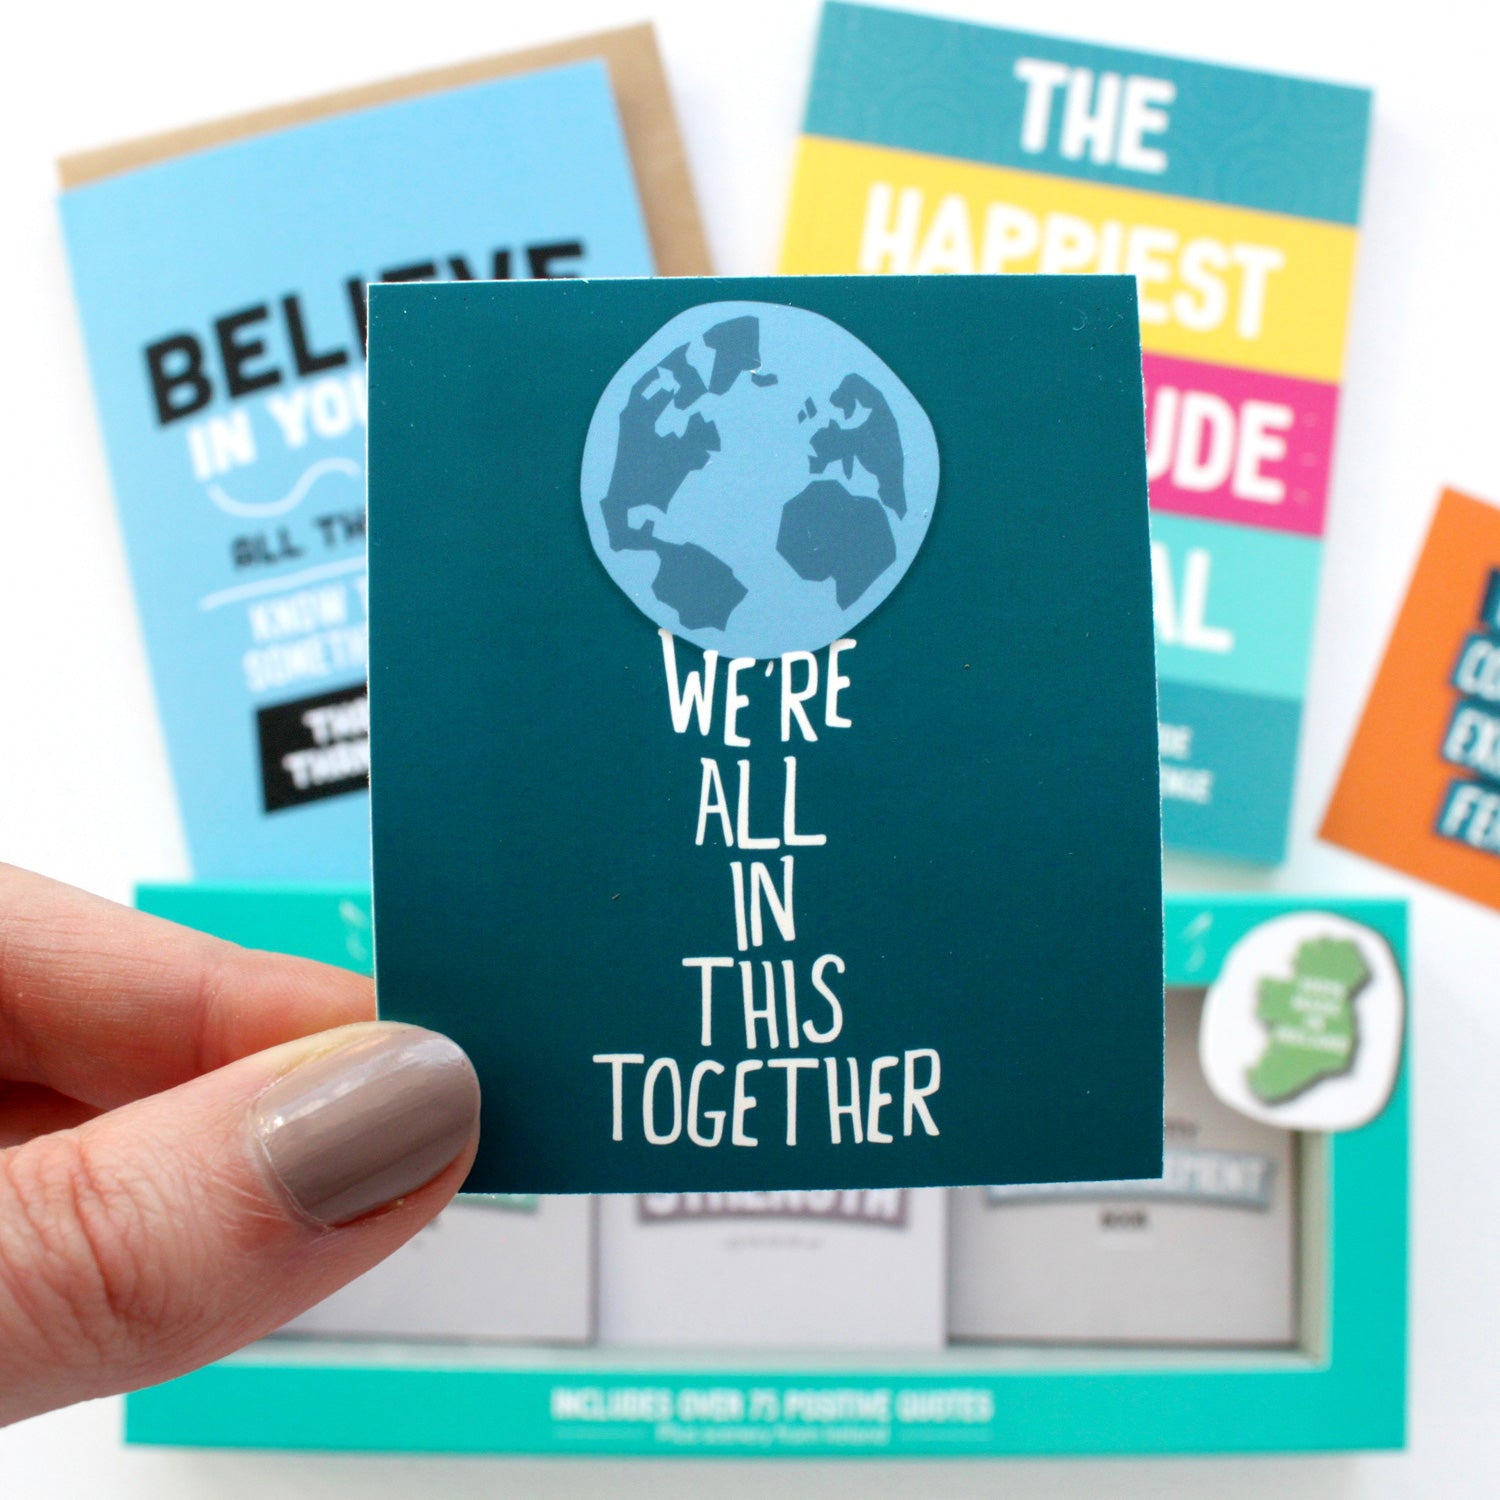 Inspirational Gift Boxes - Itty Bitty Book Co